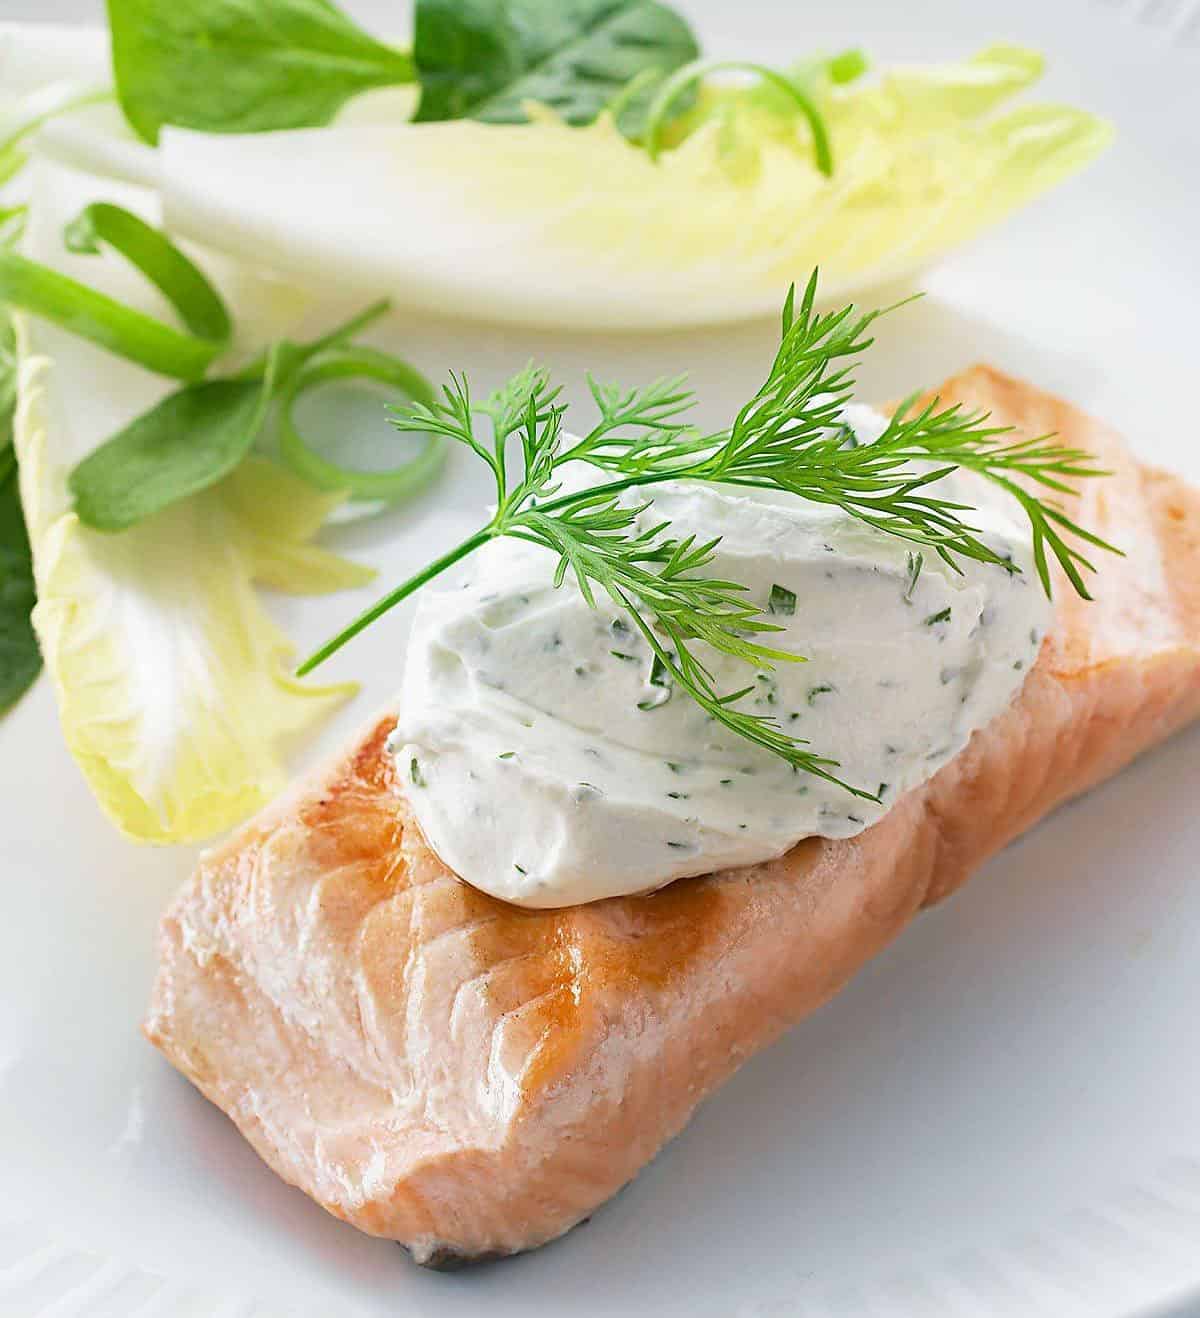 Delicious Philly salmon dish with garlic and herbs